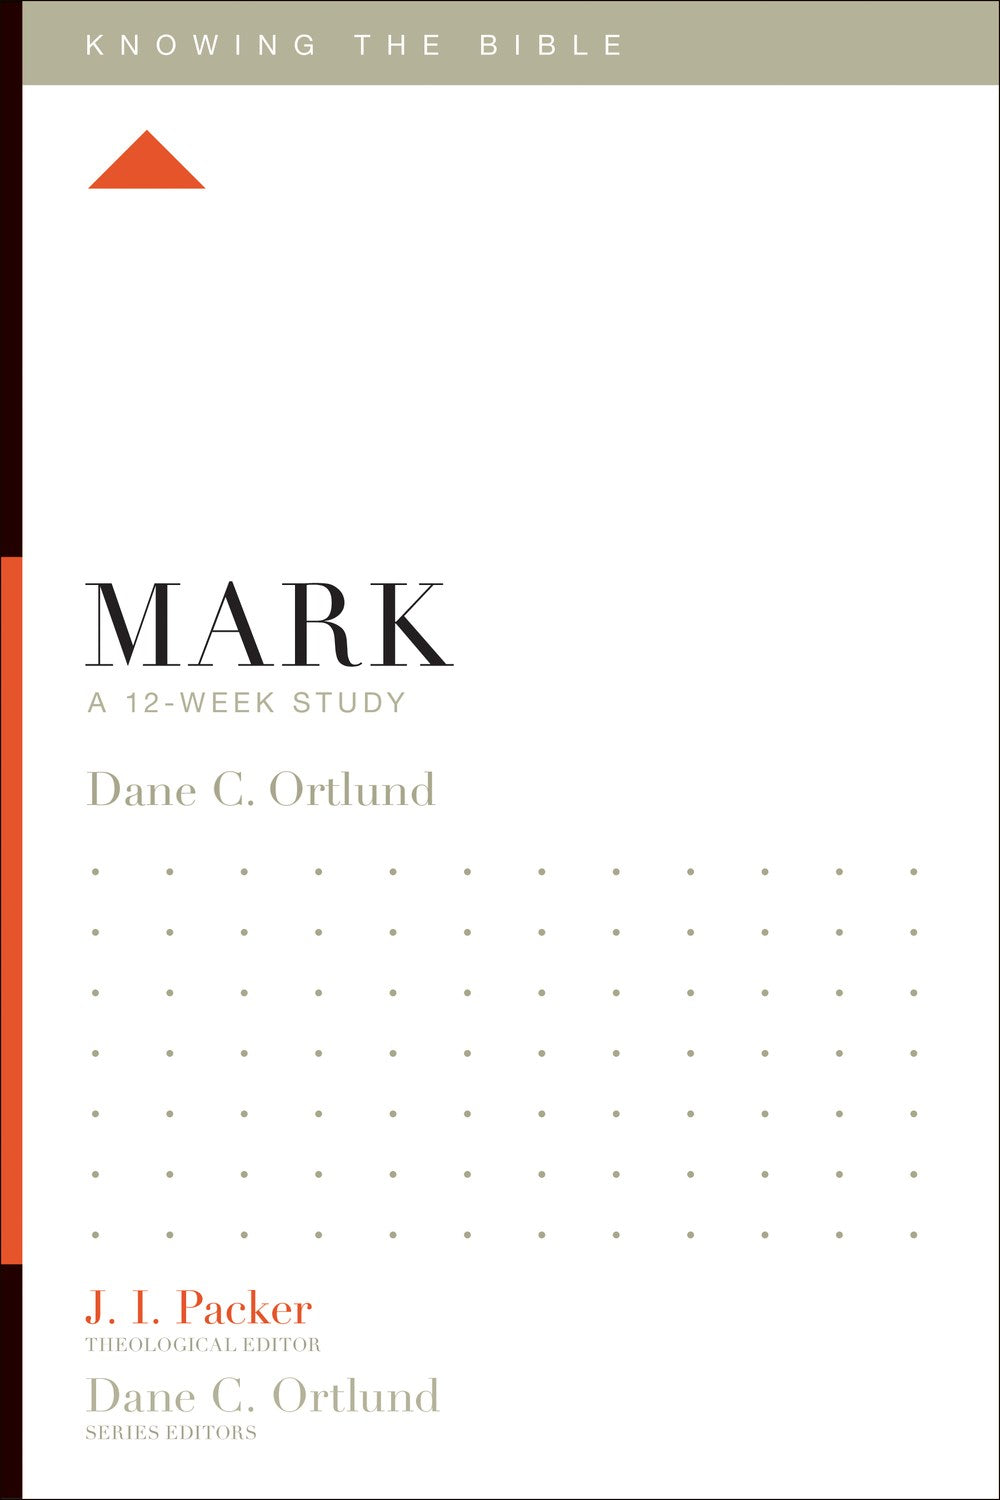 Mark: A 12-Week Study (Knowing The Bible)